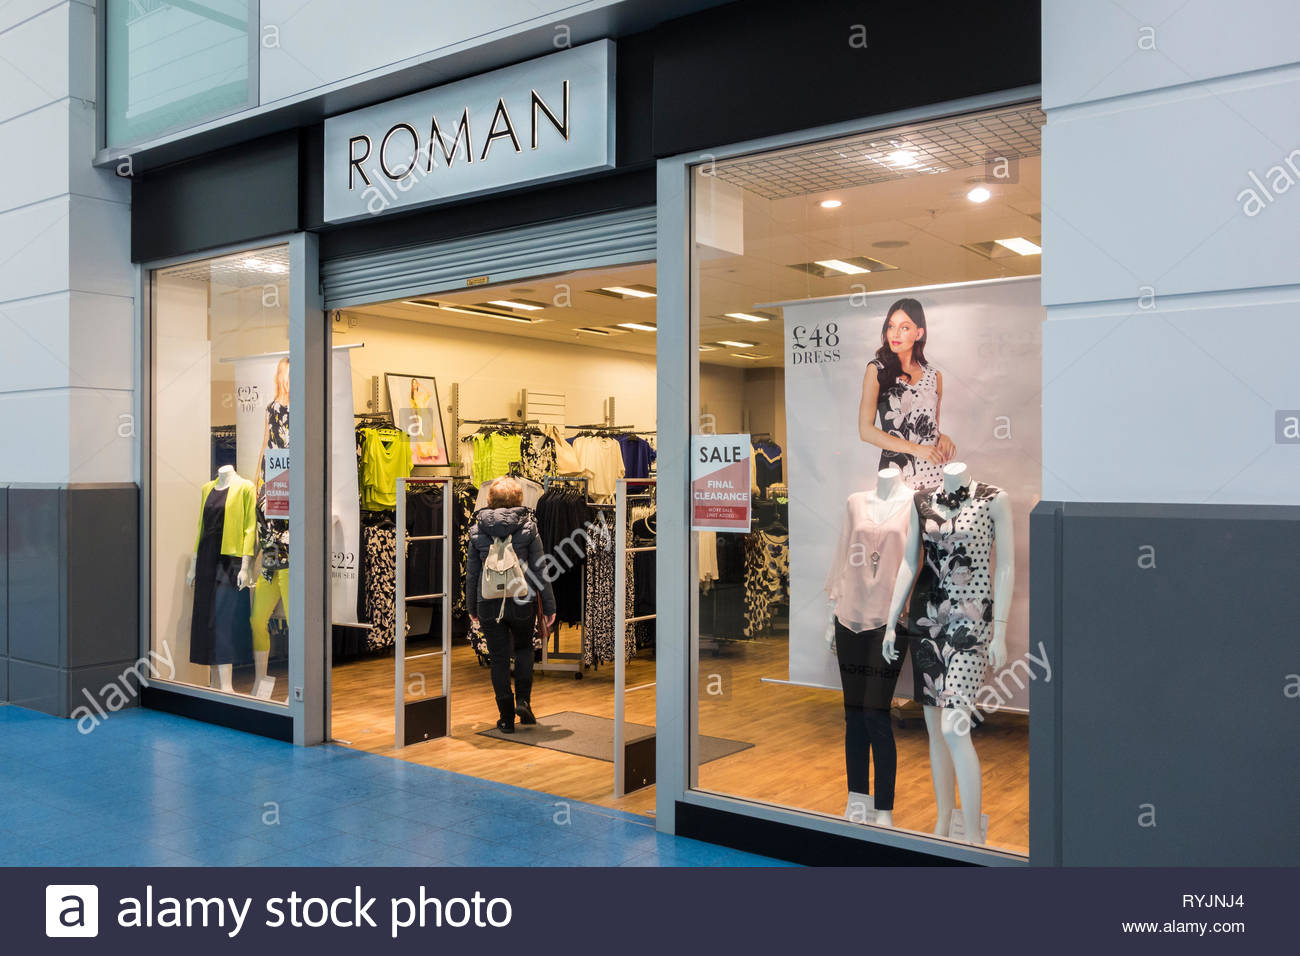 Romans Clothing Store Cheap Sale, UP TO ...